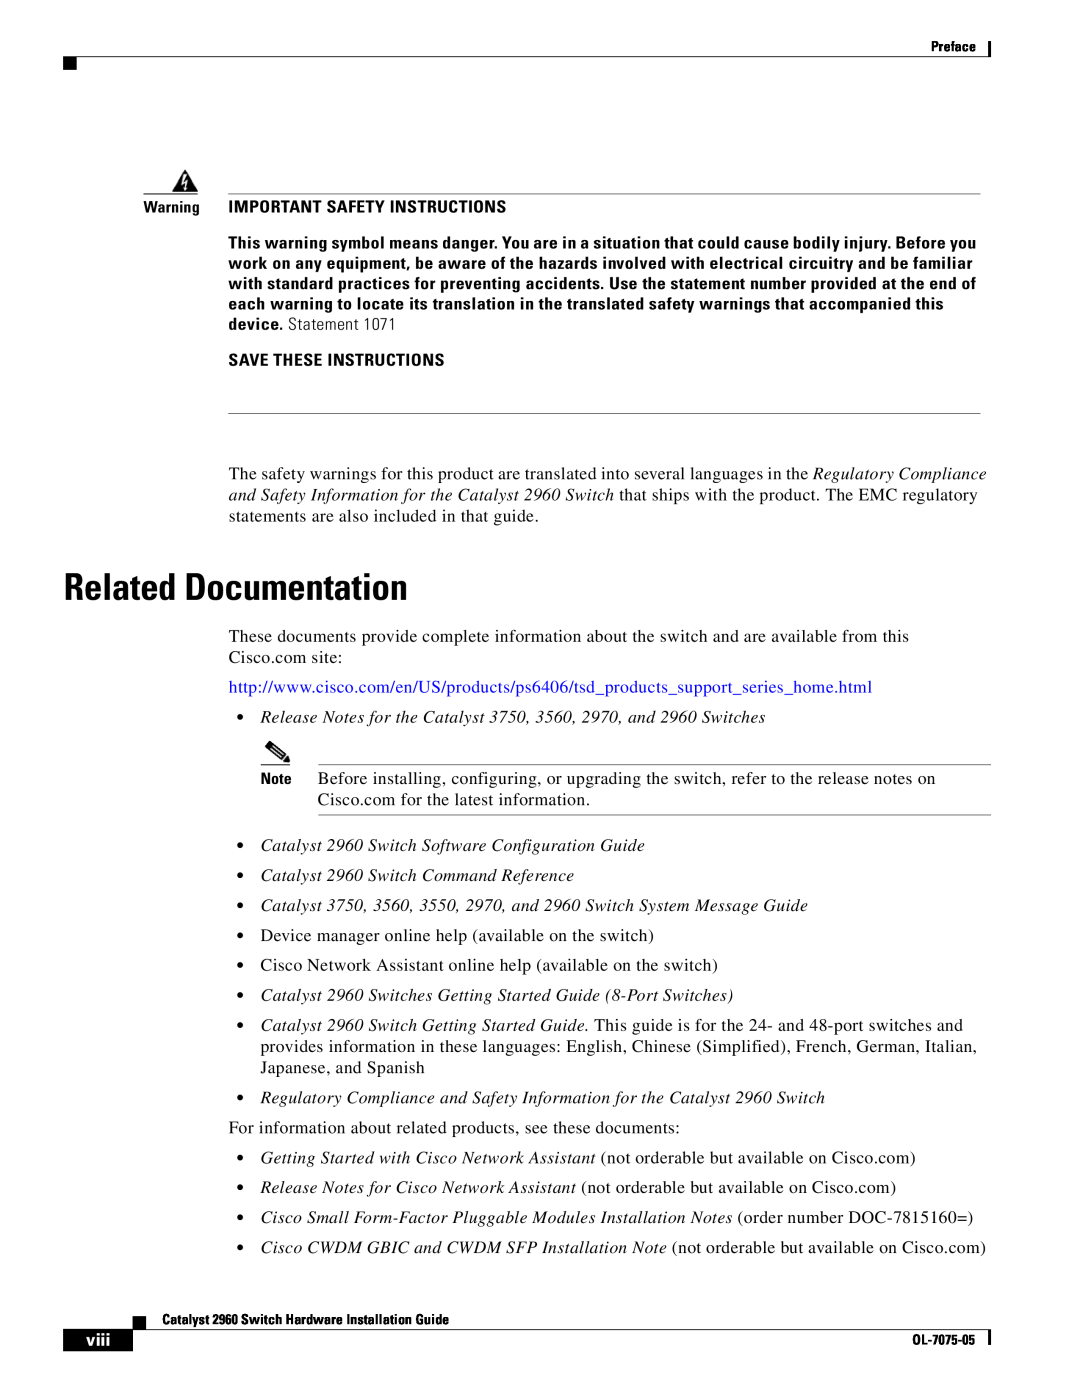 Cisco Systems 2960 Related Documentation, Warning IMPORTANT SAFETY INSTRUCTIONS, Save These Instructions, viii 